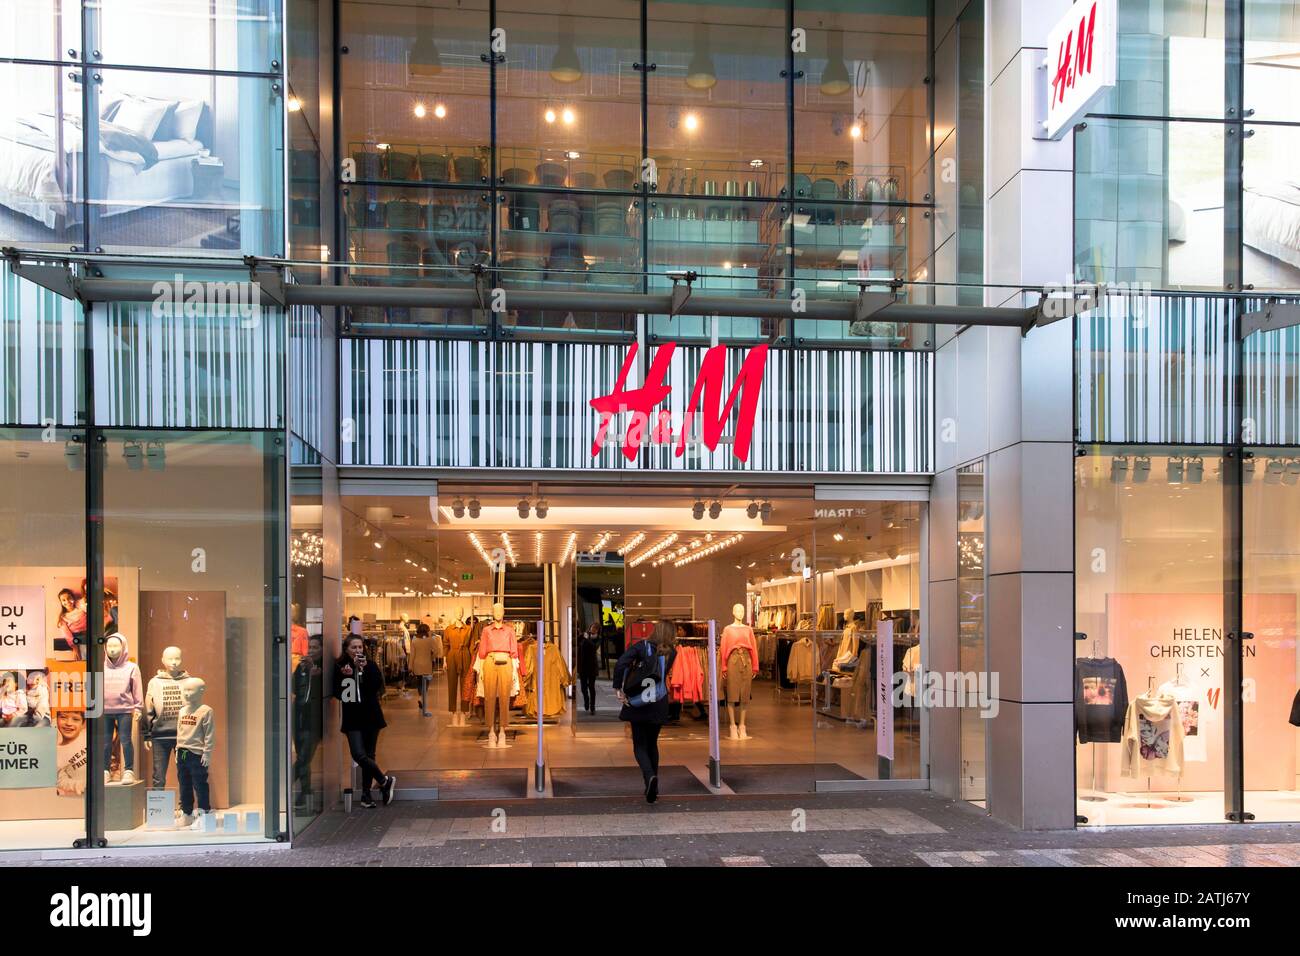 H&M to cut 1,500 jobs as retailers face slowing sales and rising